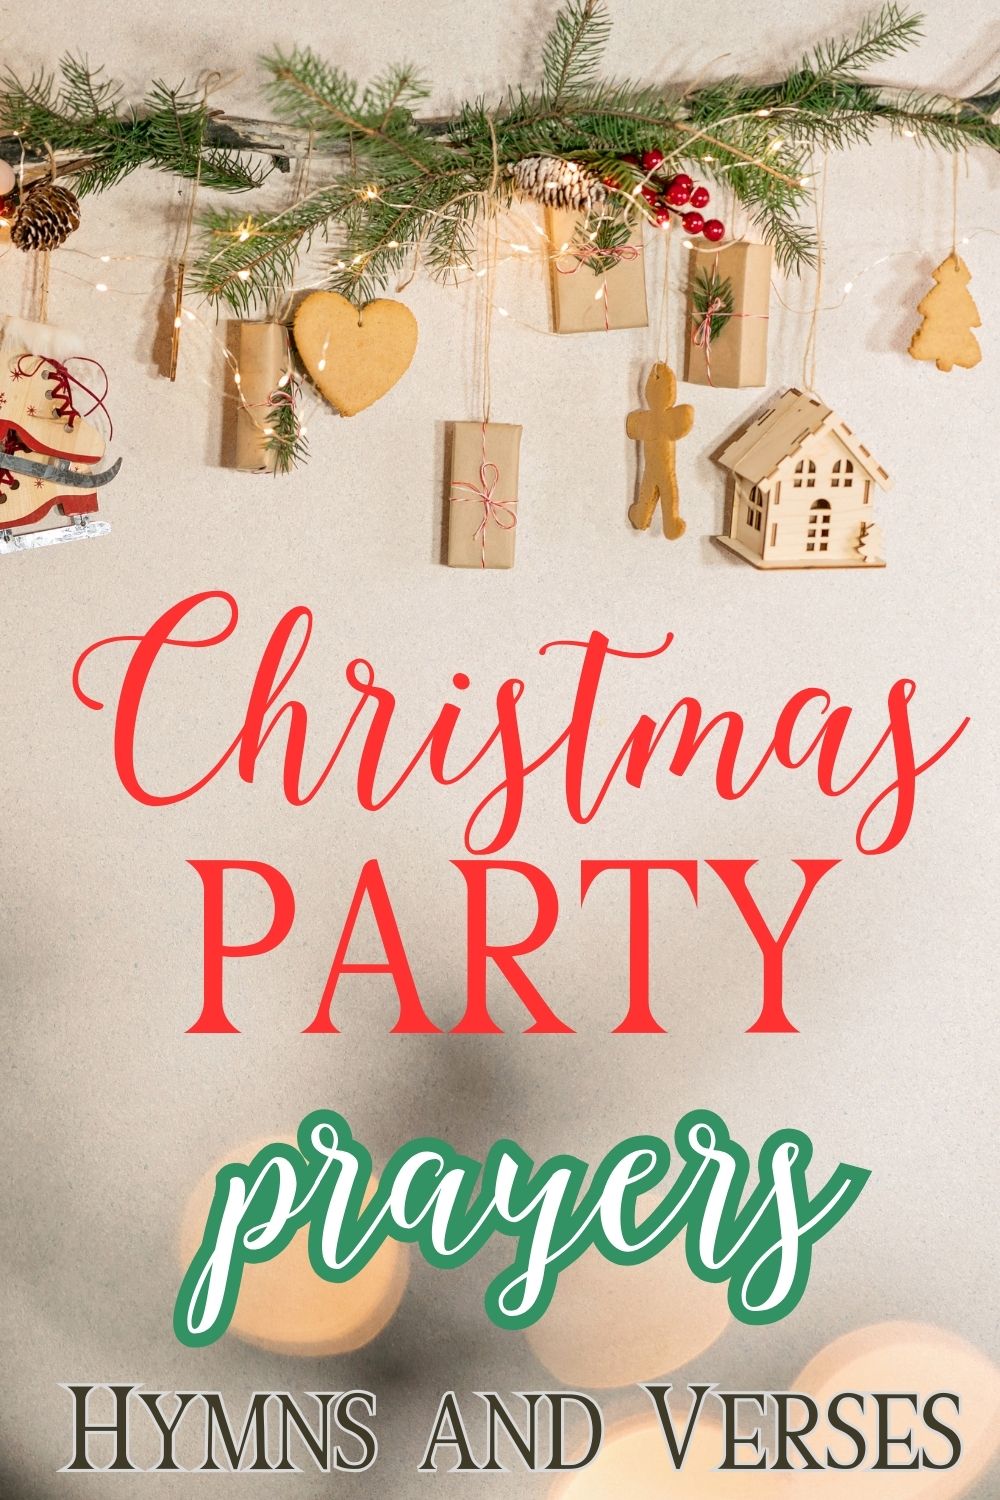 pinterest pin about christmas party prayers twinking christmas lights with branch and wooden ornaments